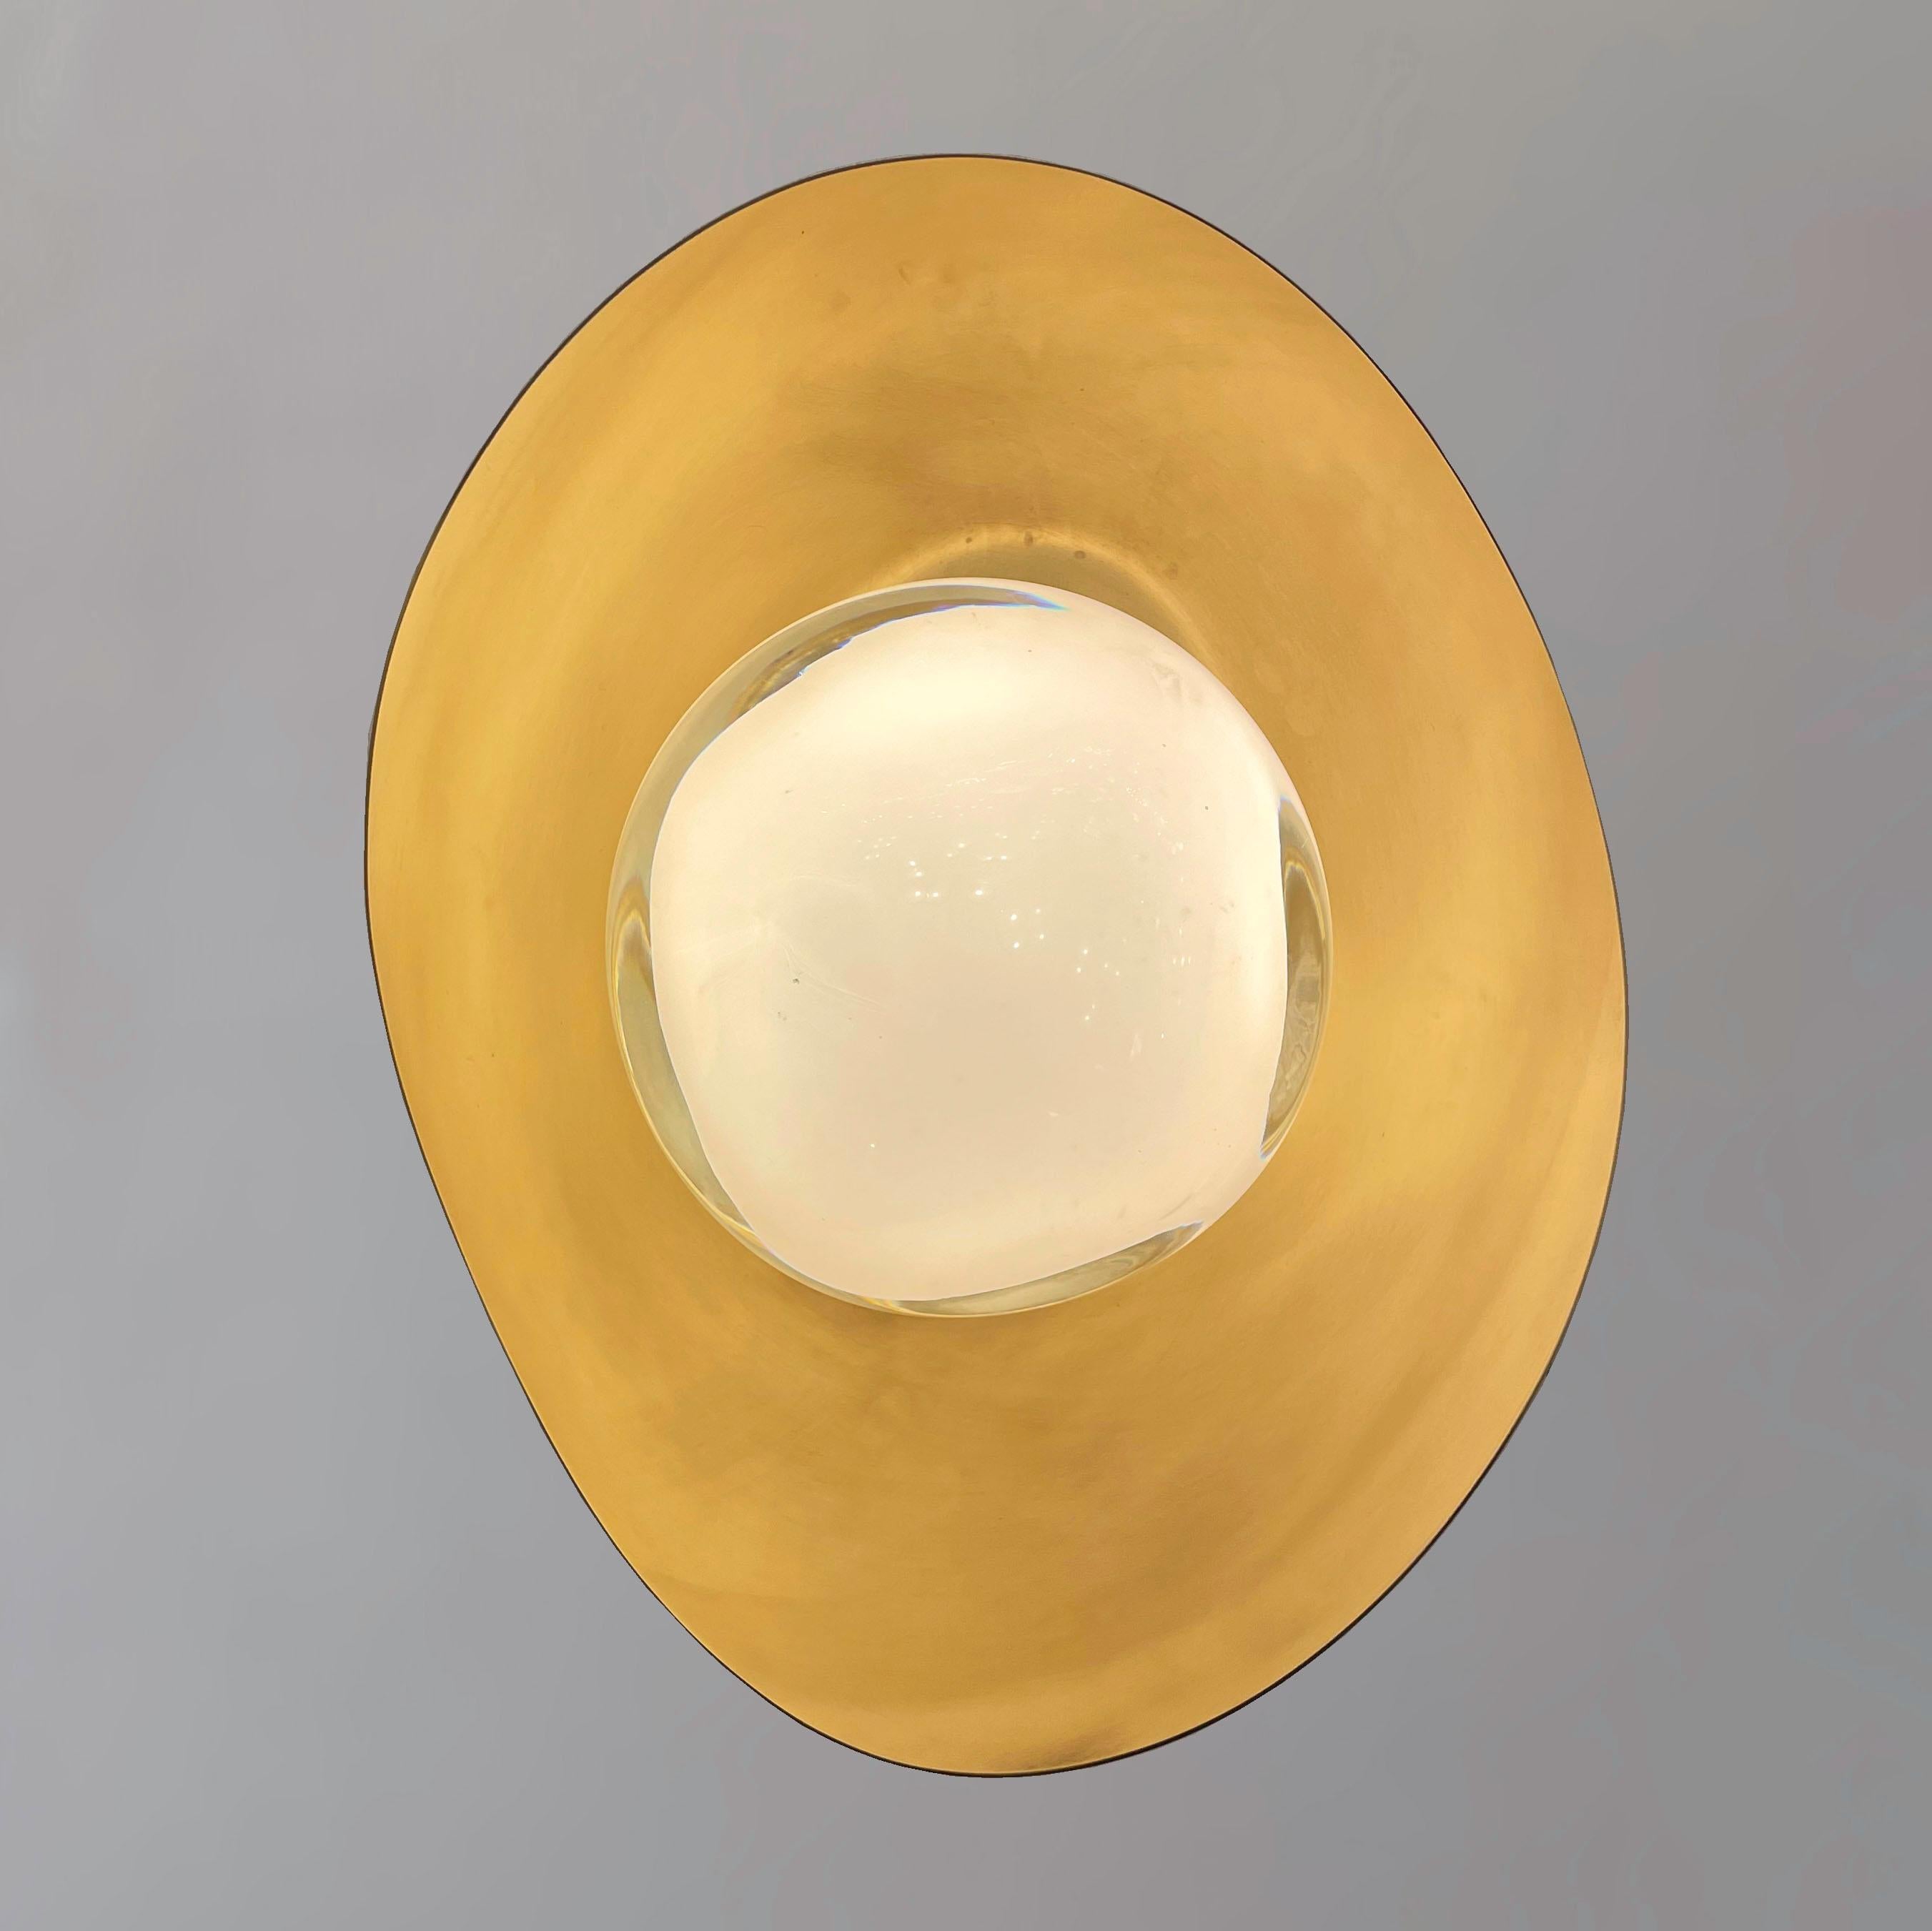 Perla Flushmount Ceiling Light by Gaspare Asaro-Satin Brass/Acqua Finish In New Condition For Sale In New York, NY